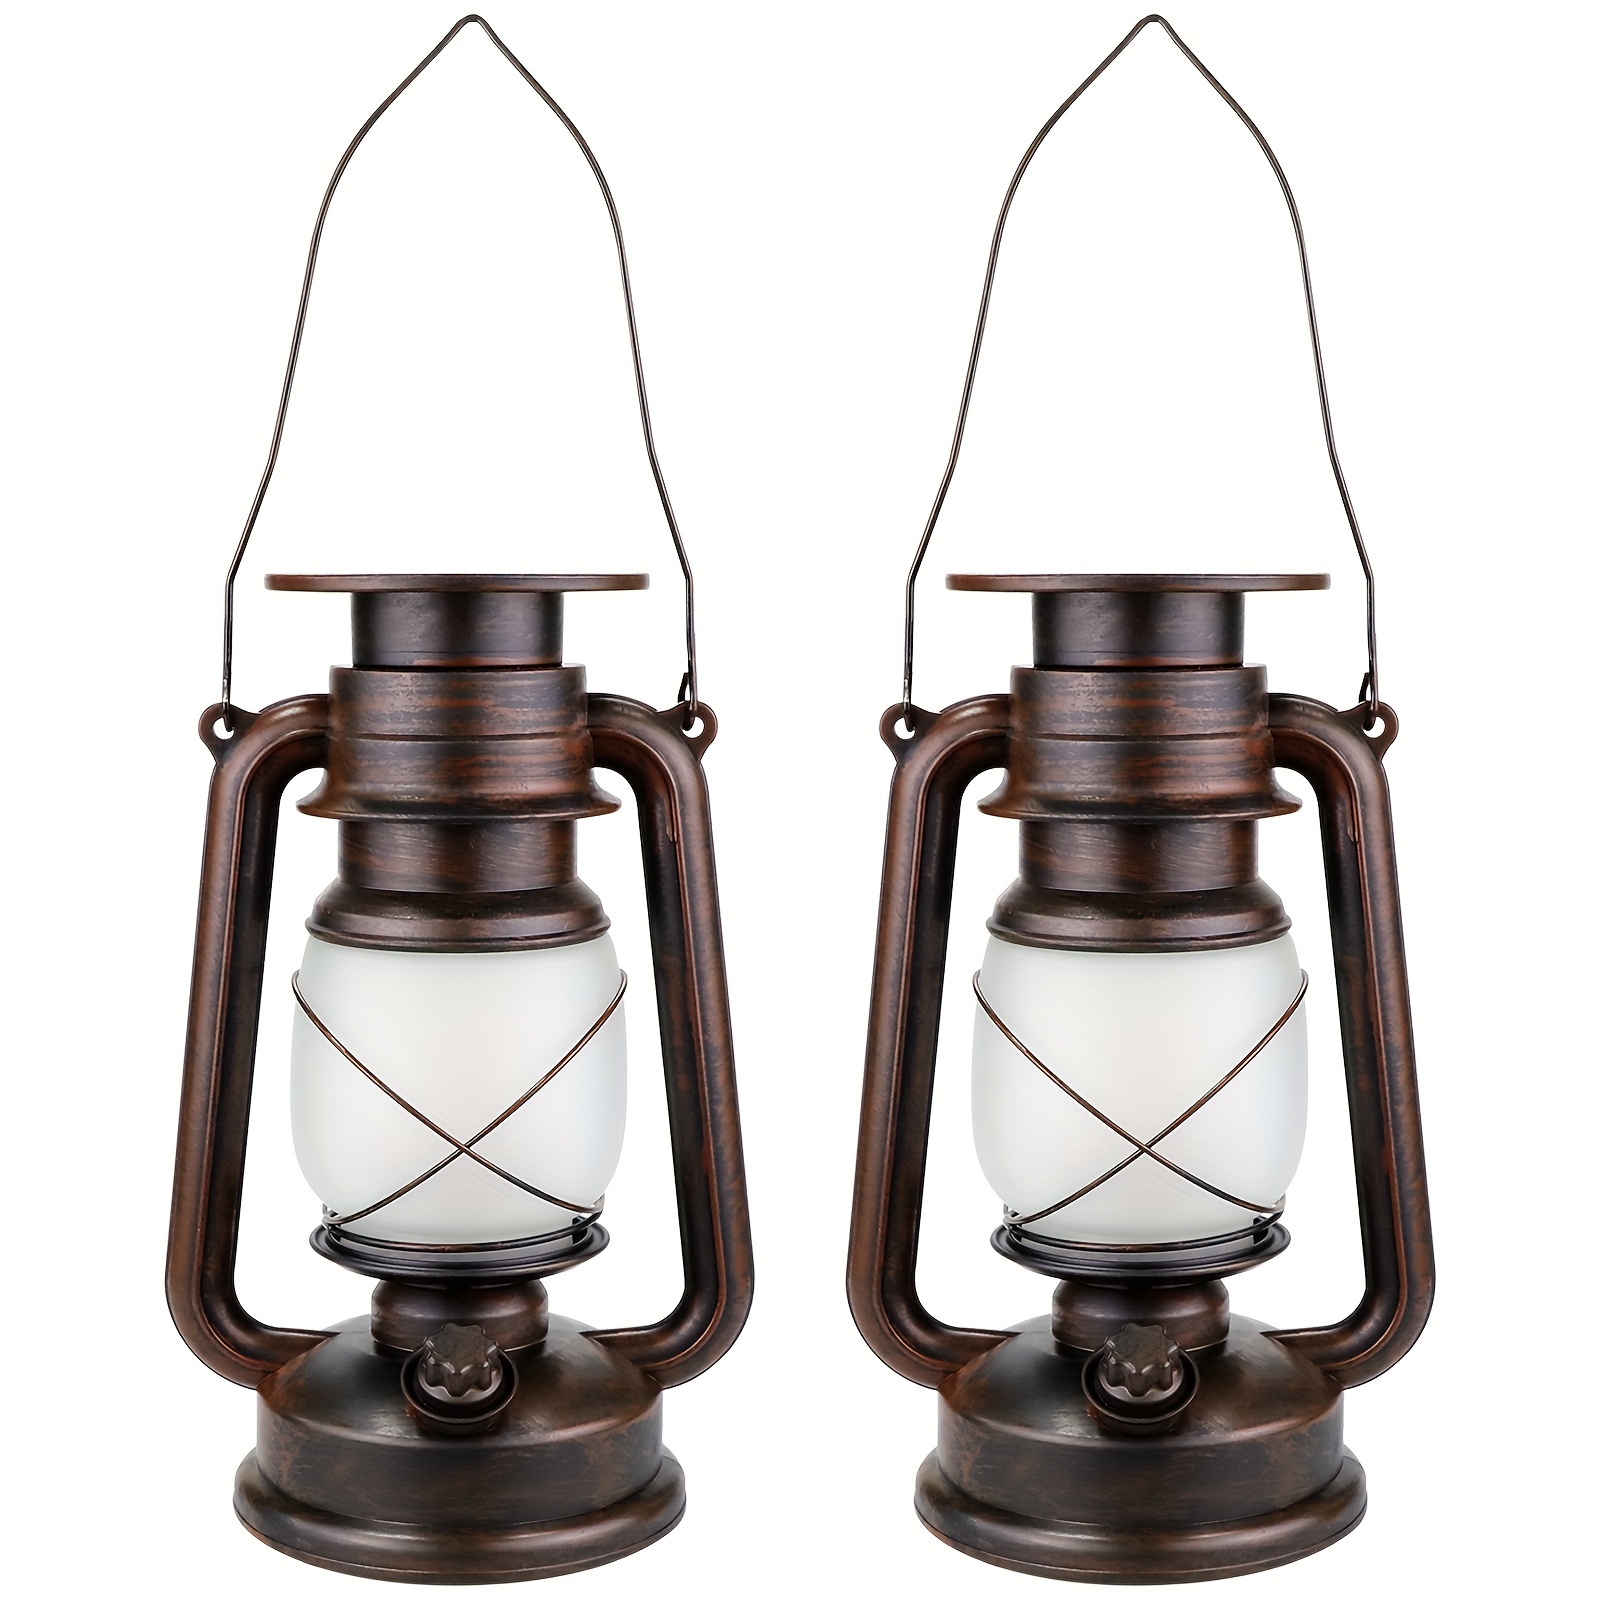 

2 Pack Vintage Led Lantern Decoration Indoor Outdoor Hanging Waterproof Lantern With Smart Remote Control Battery Powered Lantern Flickering Flame 2 Models For Garden Yard Pathway Porch